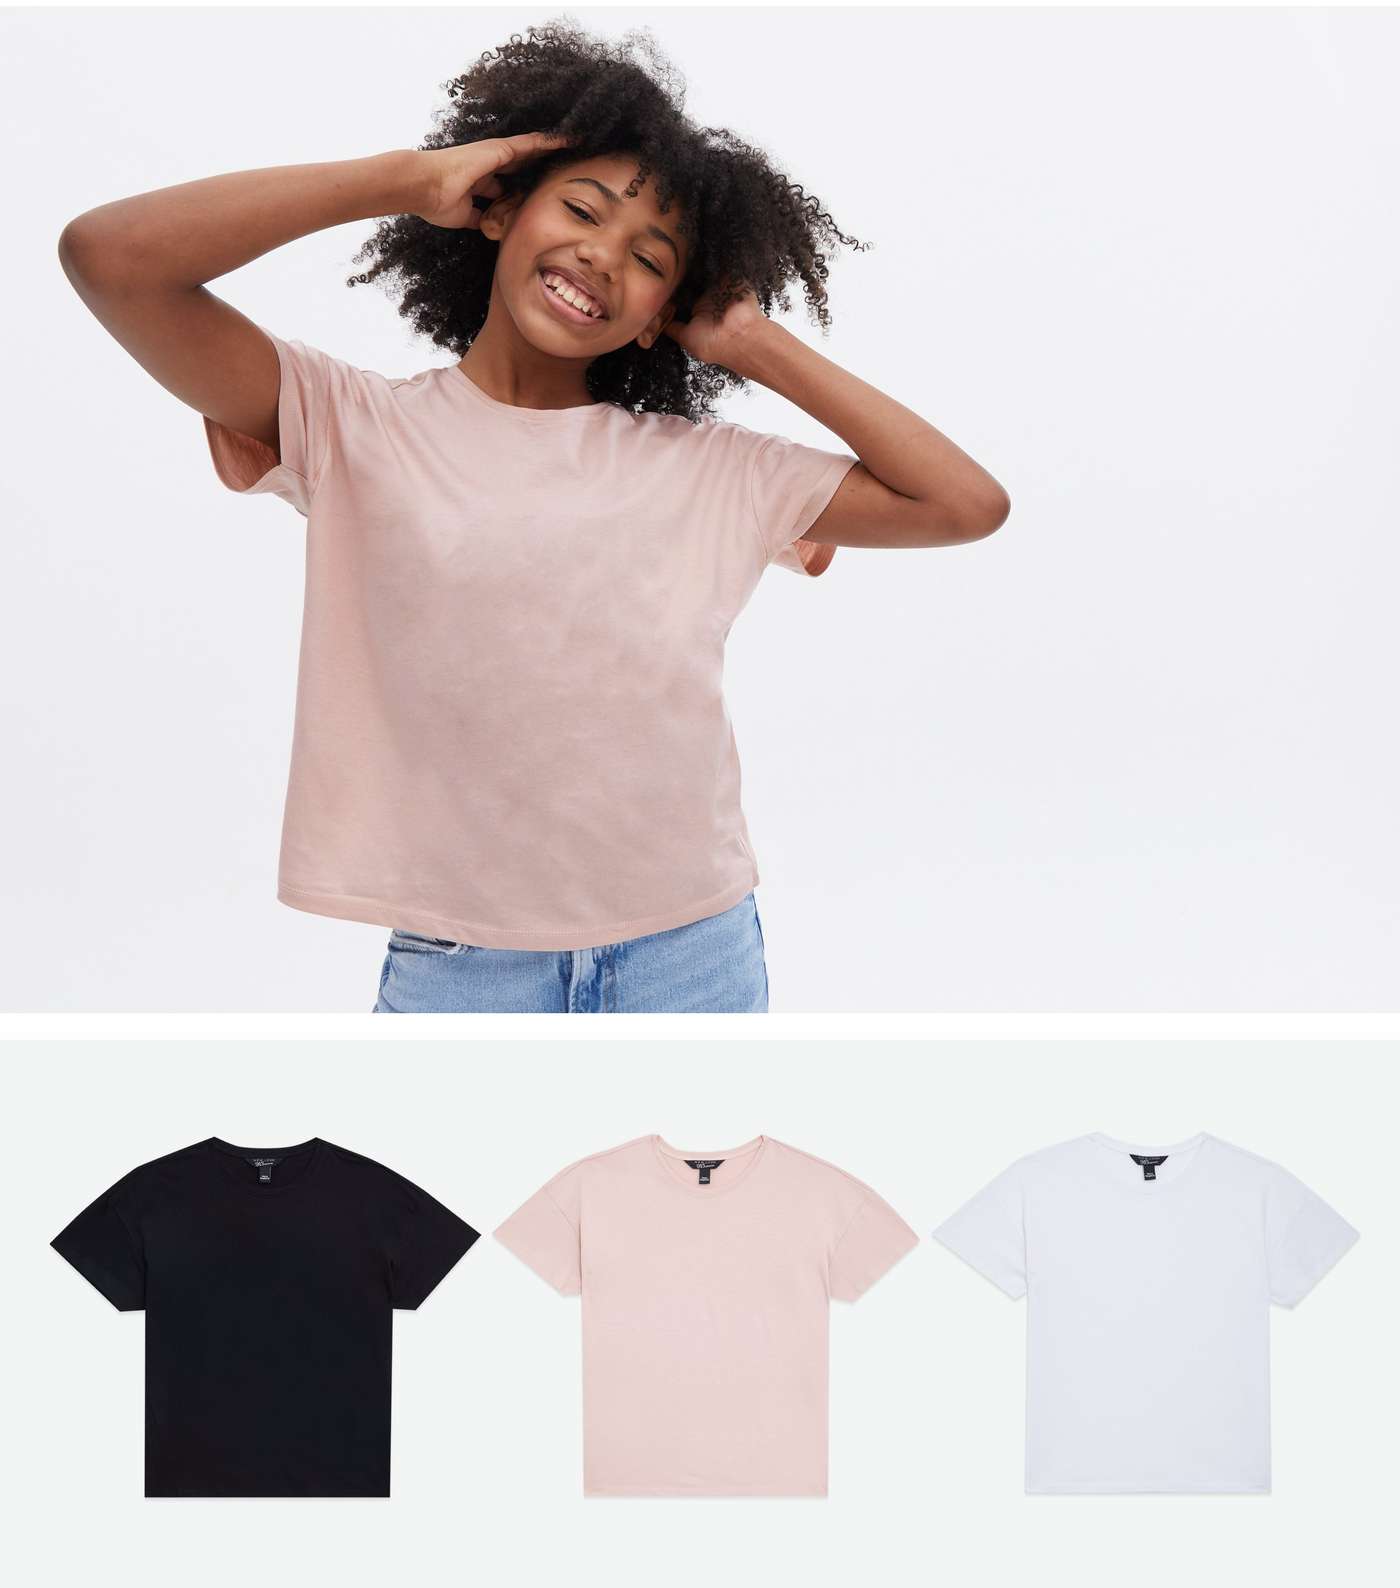 Girls 3 Pack Pink Black and White Crew Neck T-Shirts